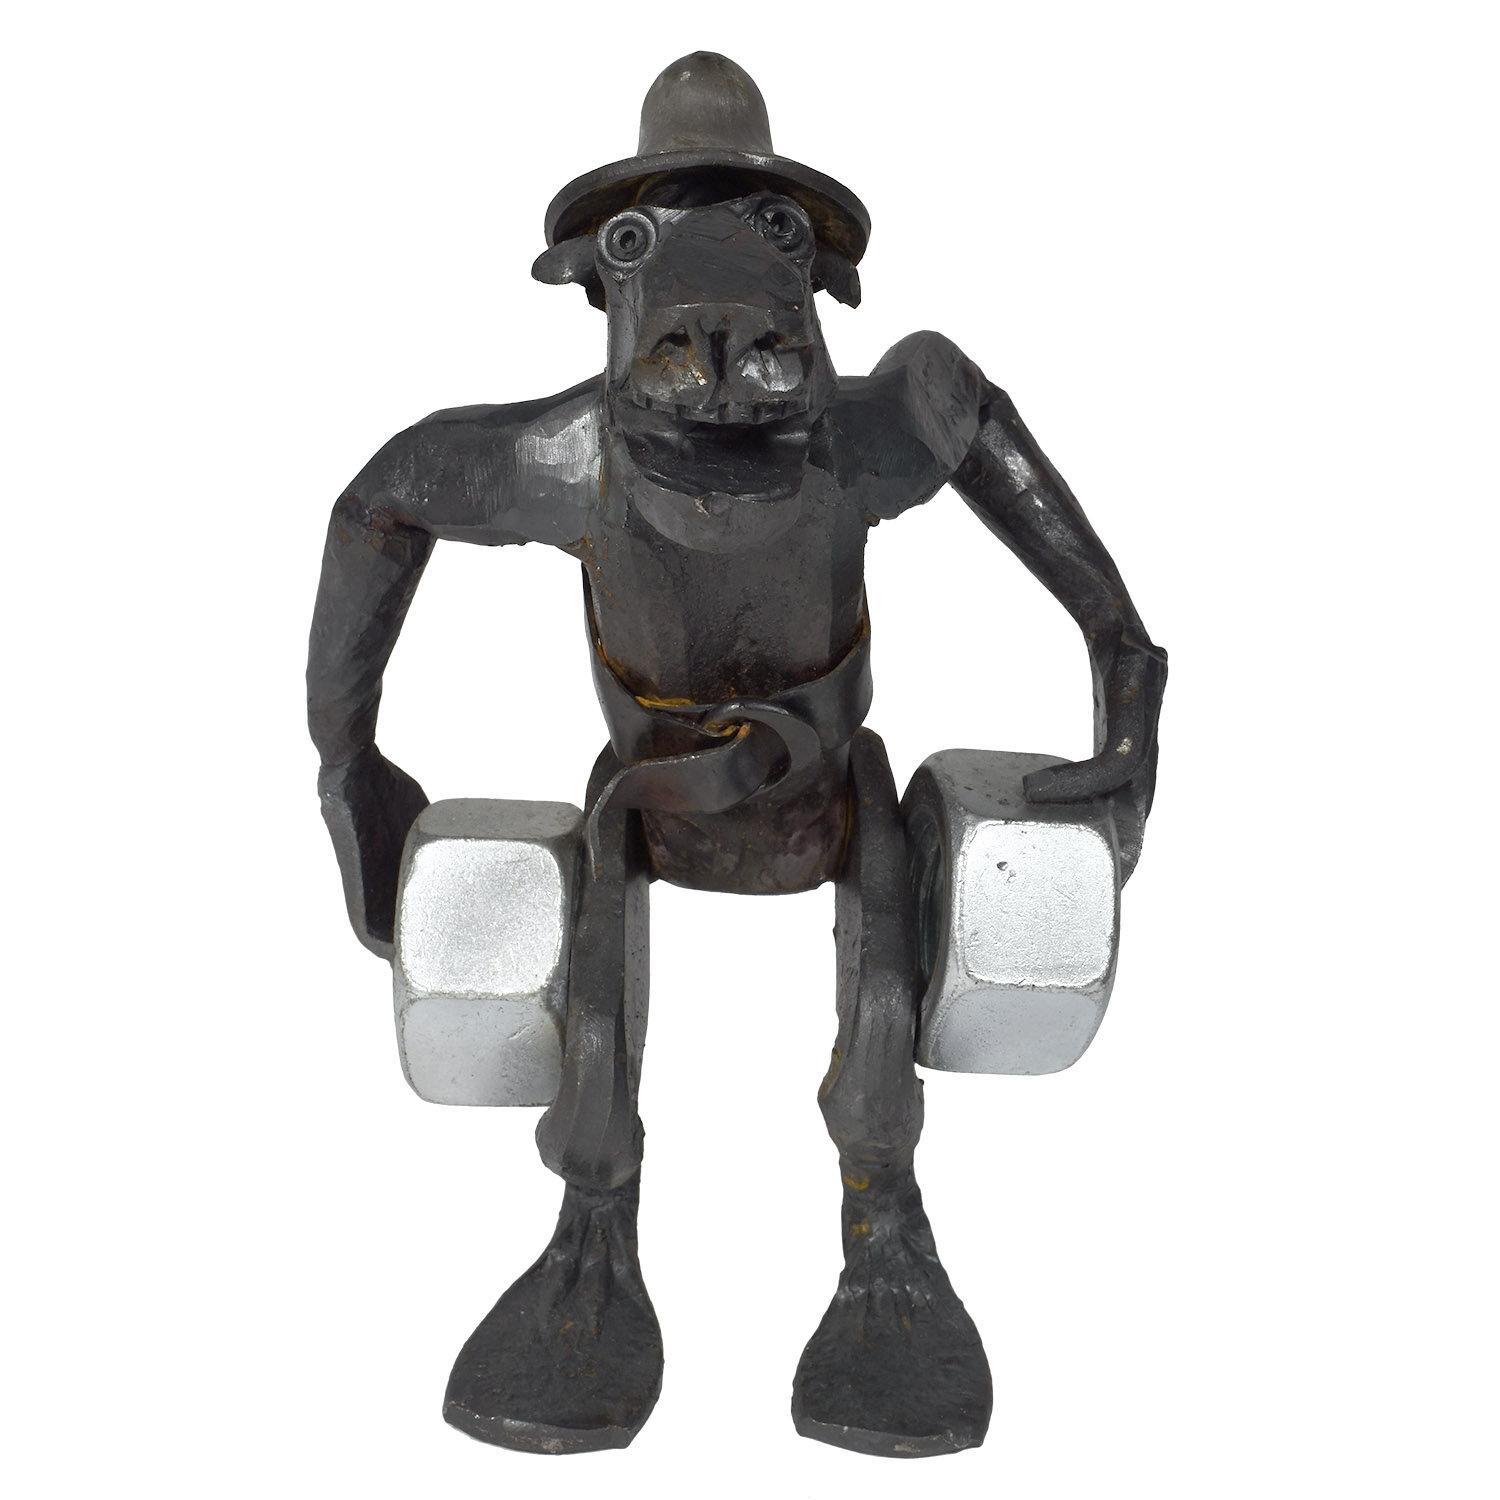 Handcrafted by William Roan, the blacksmith famous for making the original Bay Bridge Troll. About this piece, he writes, “In Of Mice and Men, farmworkers who move and stack heavy bags of seed are called Buckers or Barley Buckers.”